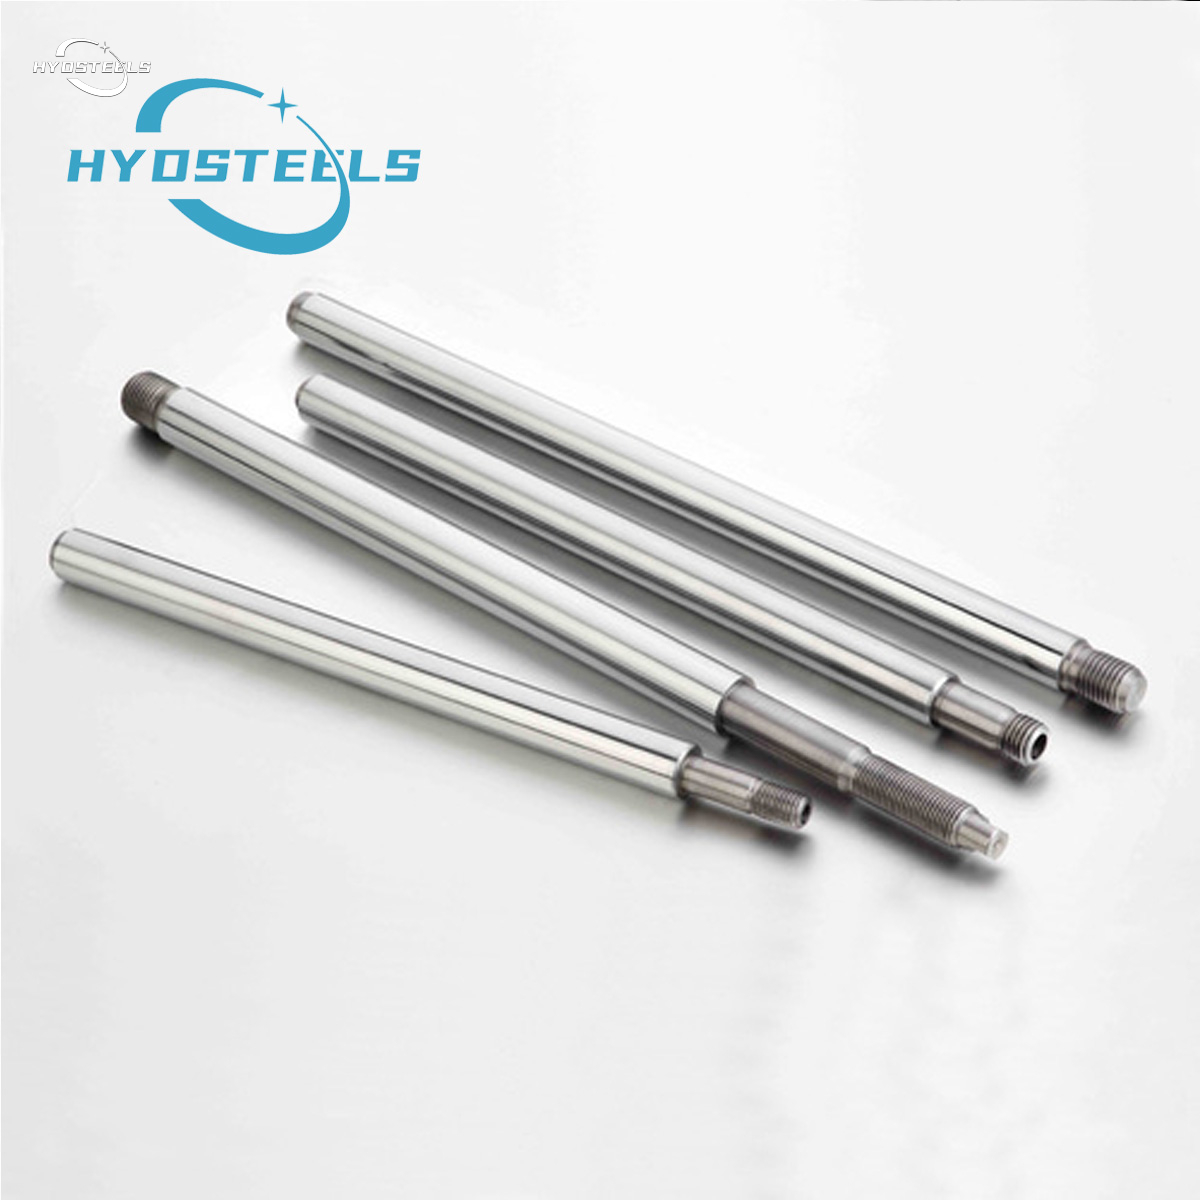 Ck45 Hard Chrome Plated Piston Rod for Hydraulic Cylinder Manufacturer